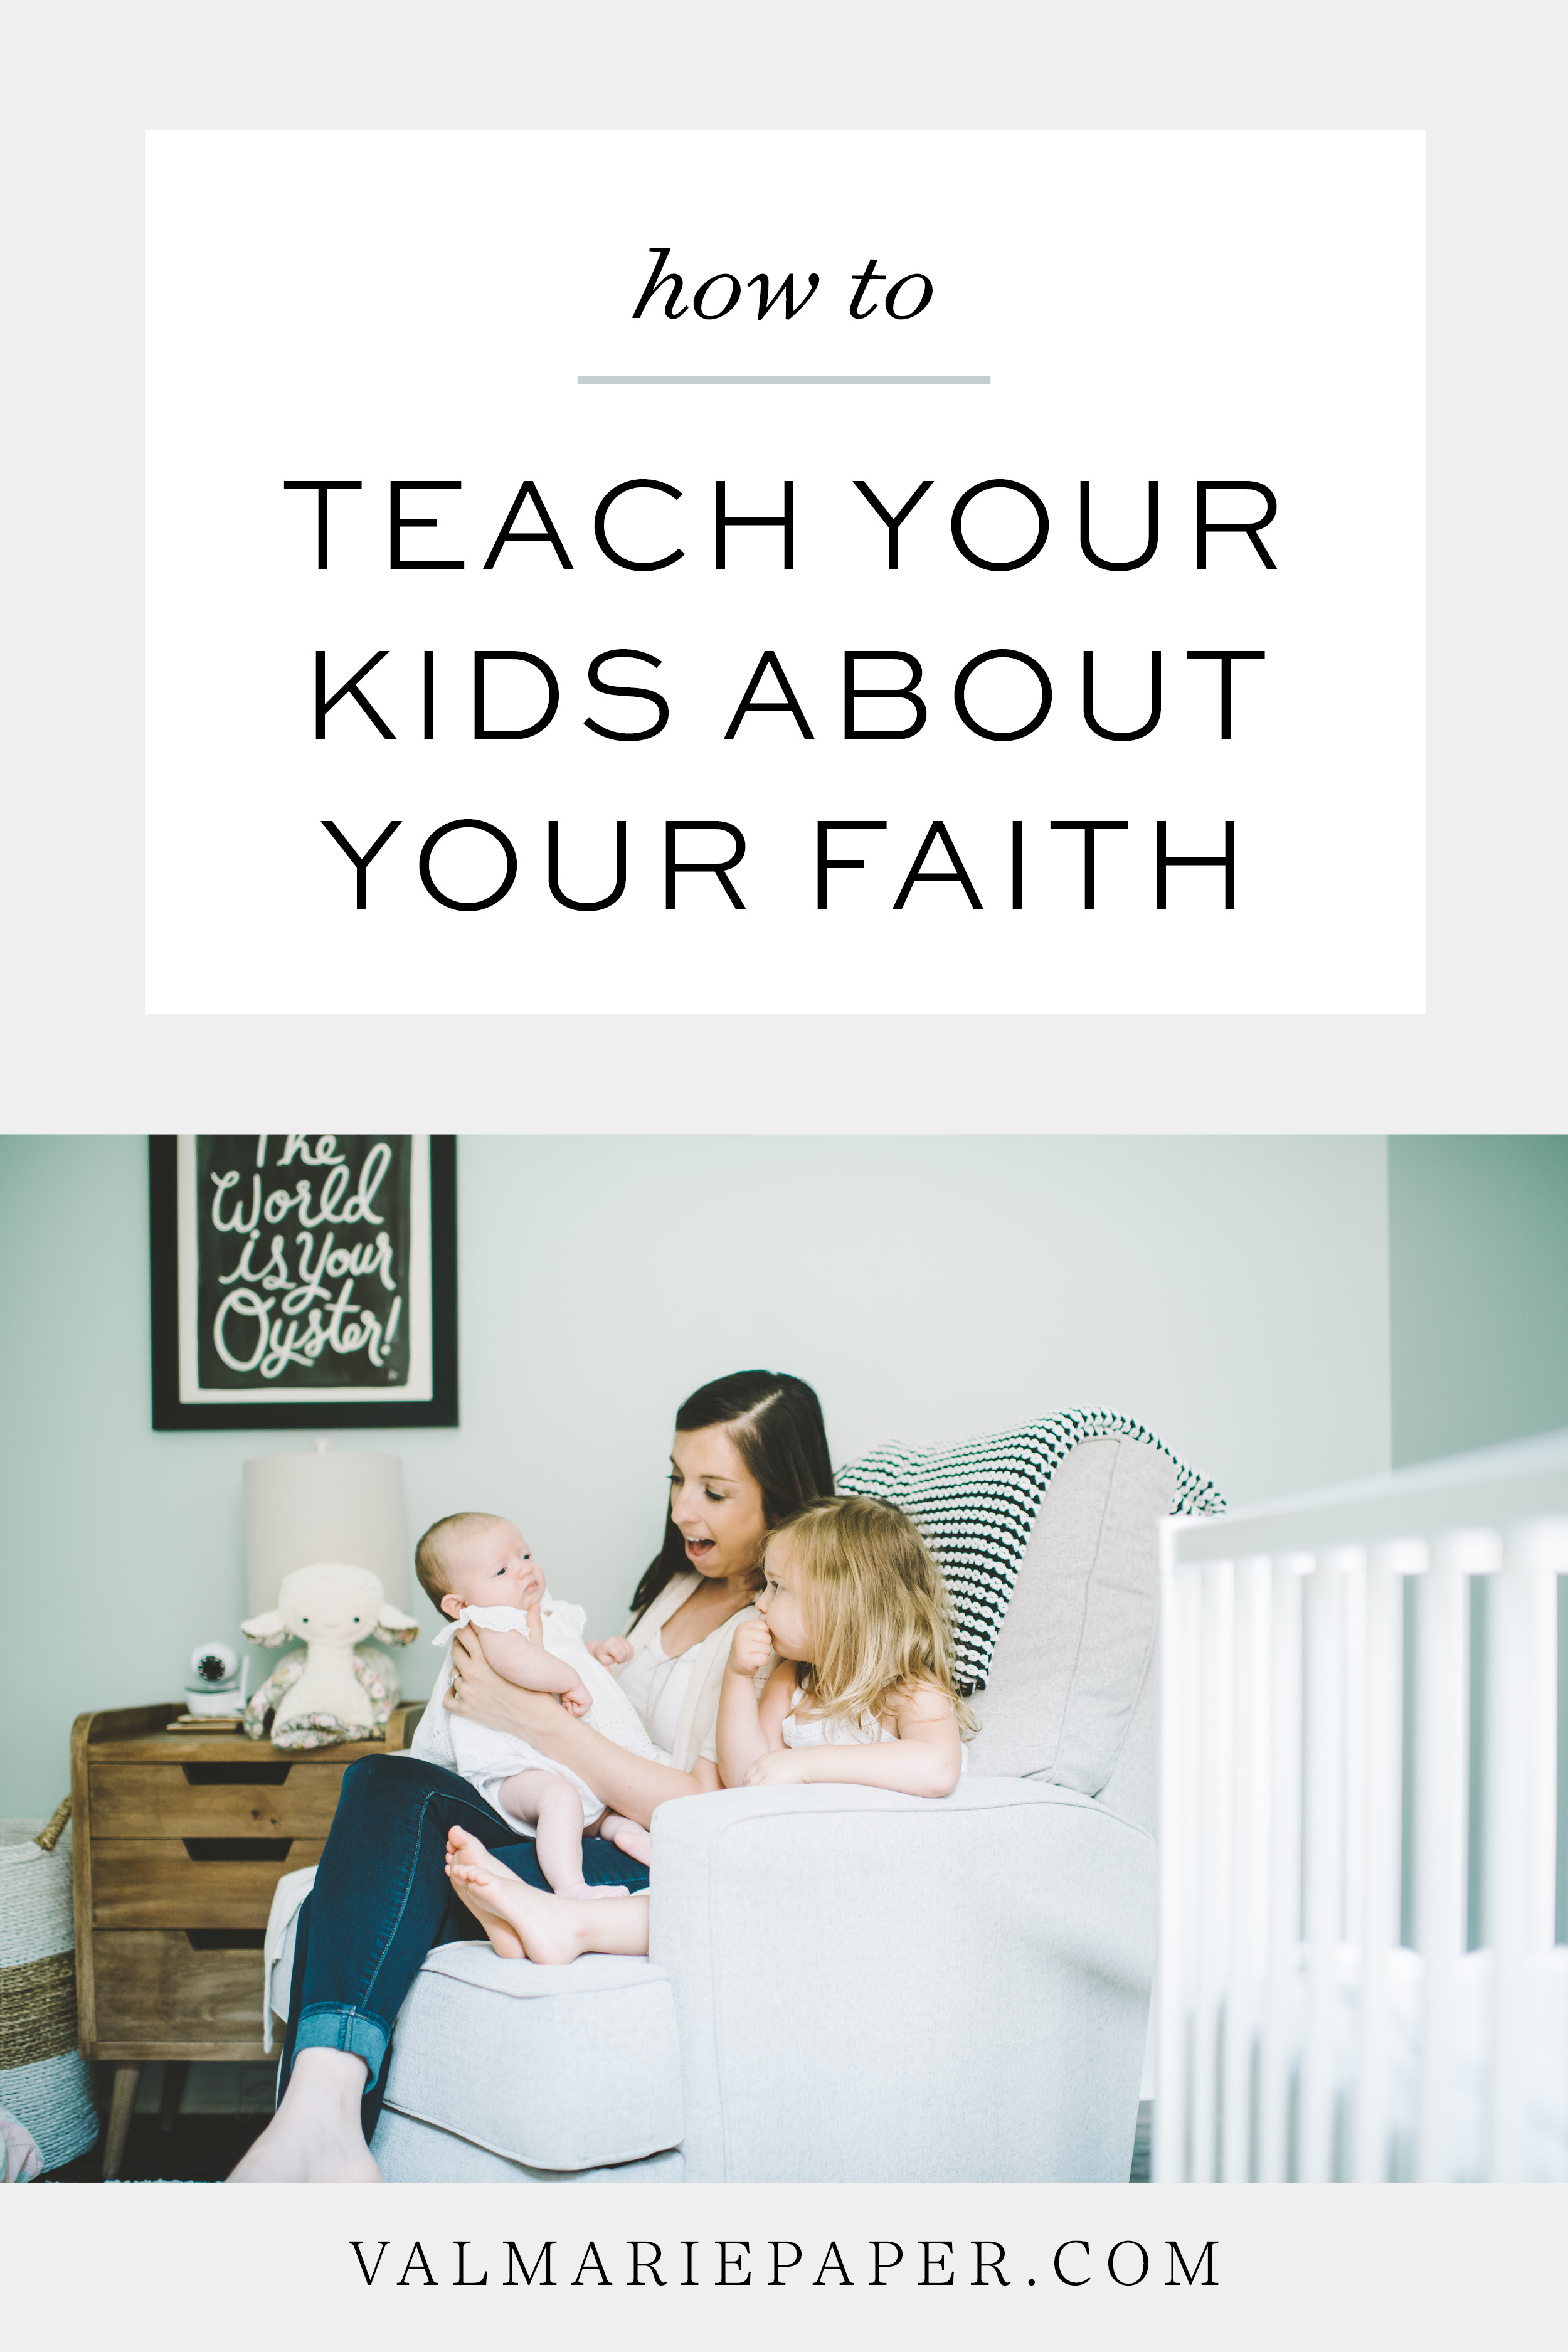 How to teach kids about God by Valerie Woerner | Val Marie Paper, prayer tools, Christian parenting, motherhood, resources, teaching, kids who love the Lord, children, Sunday School, children's ministry, church